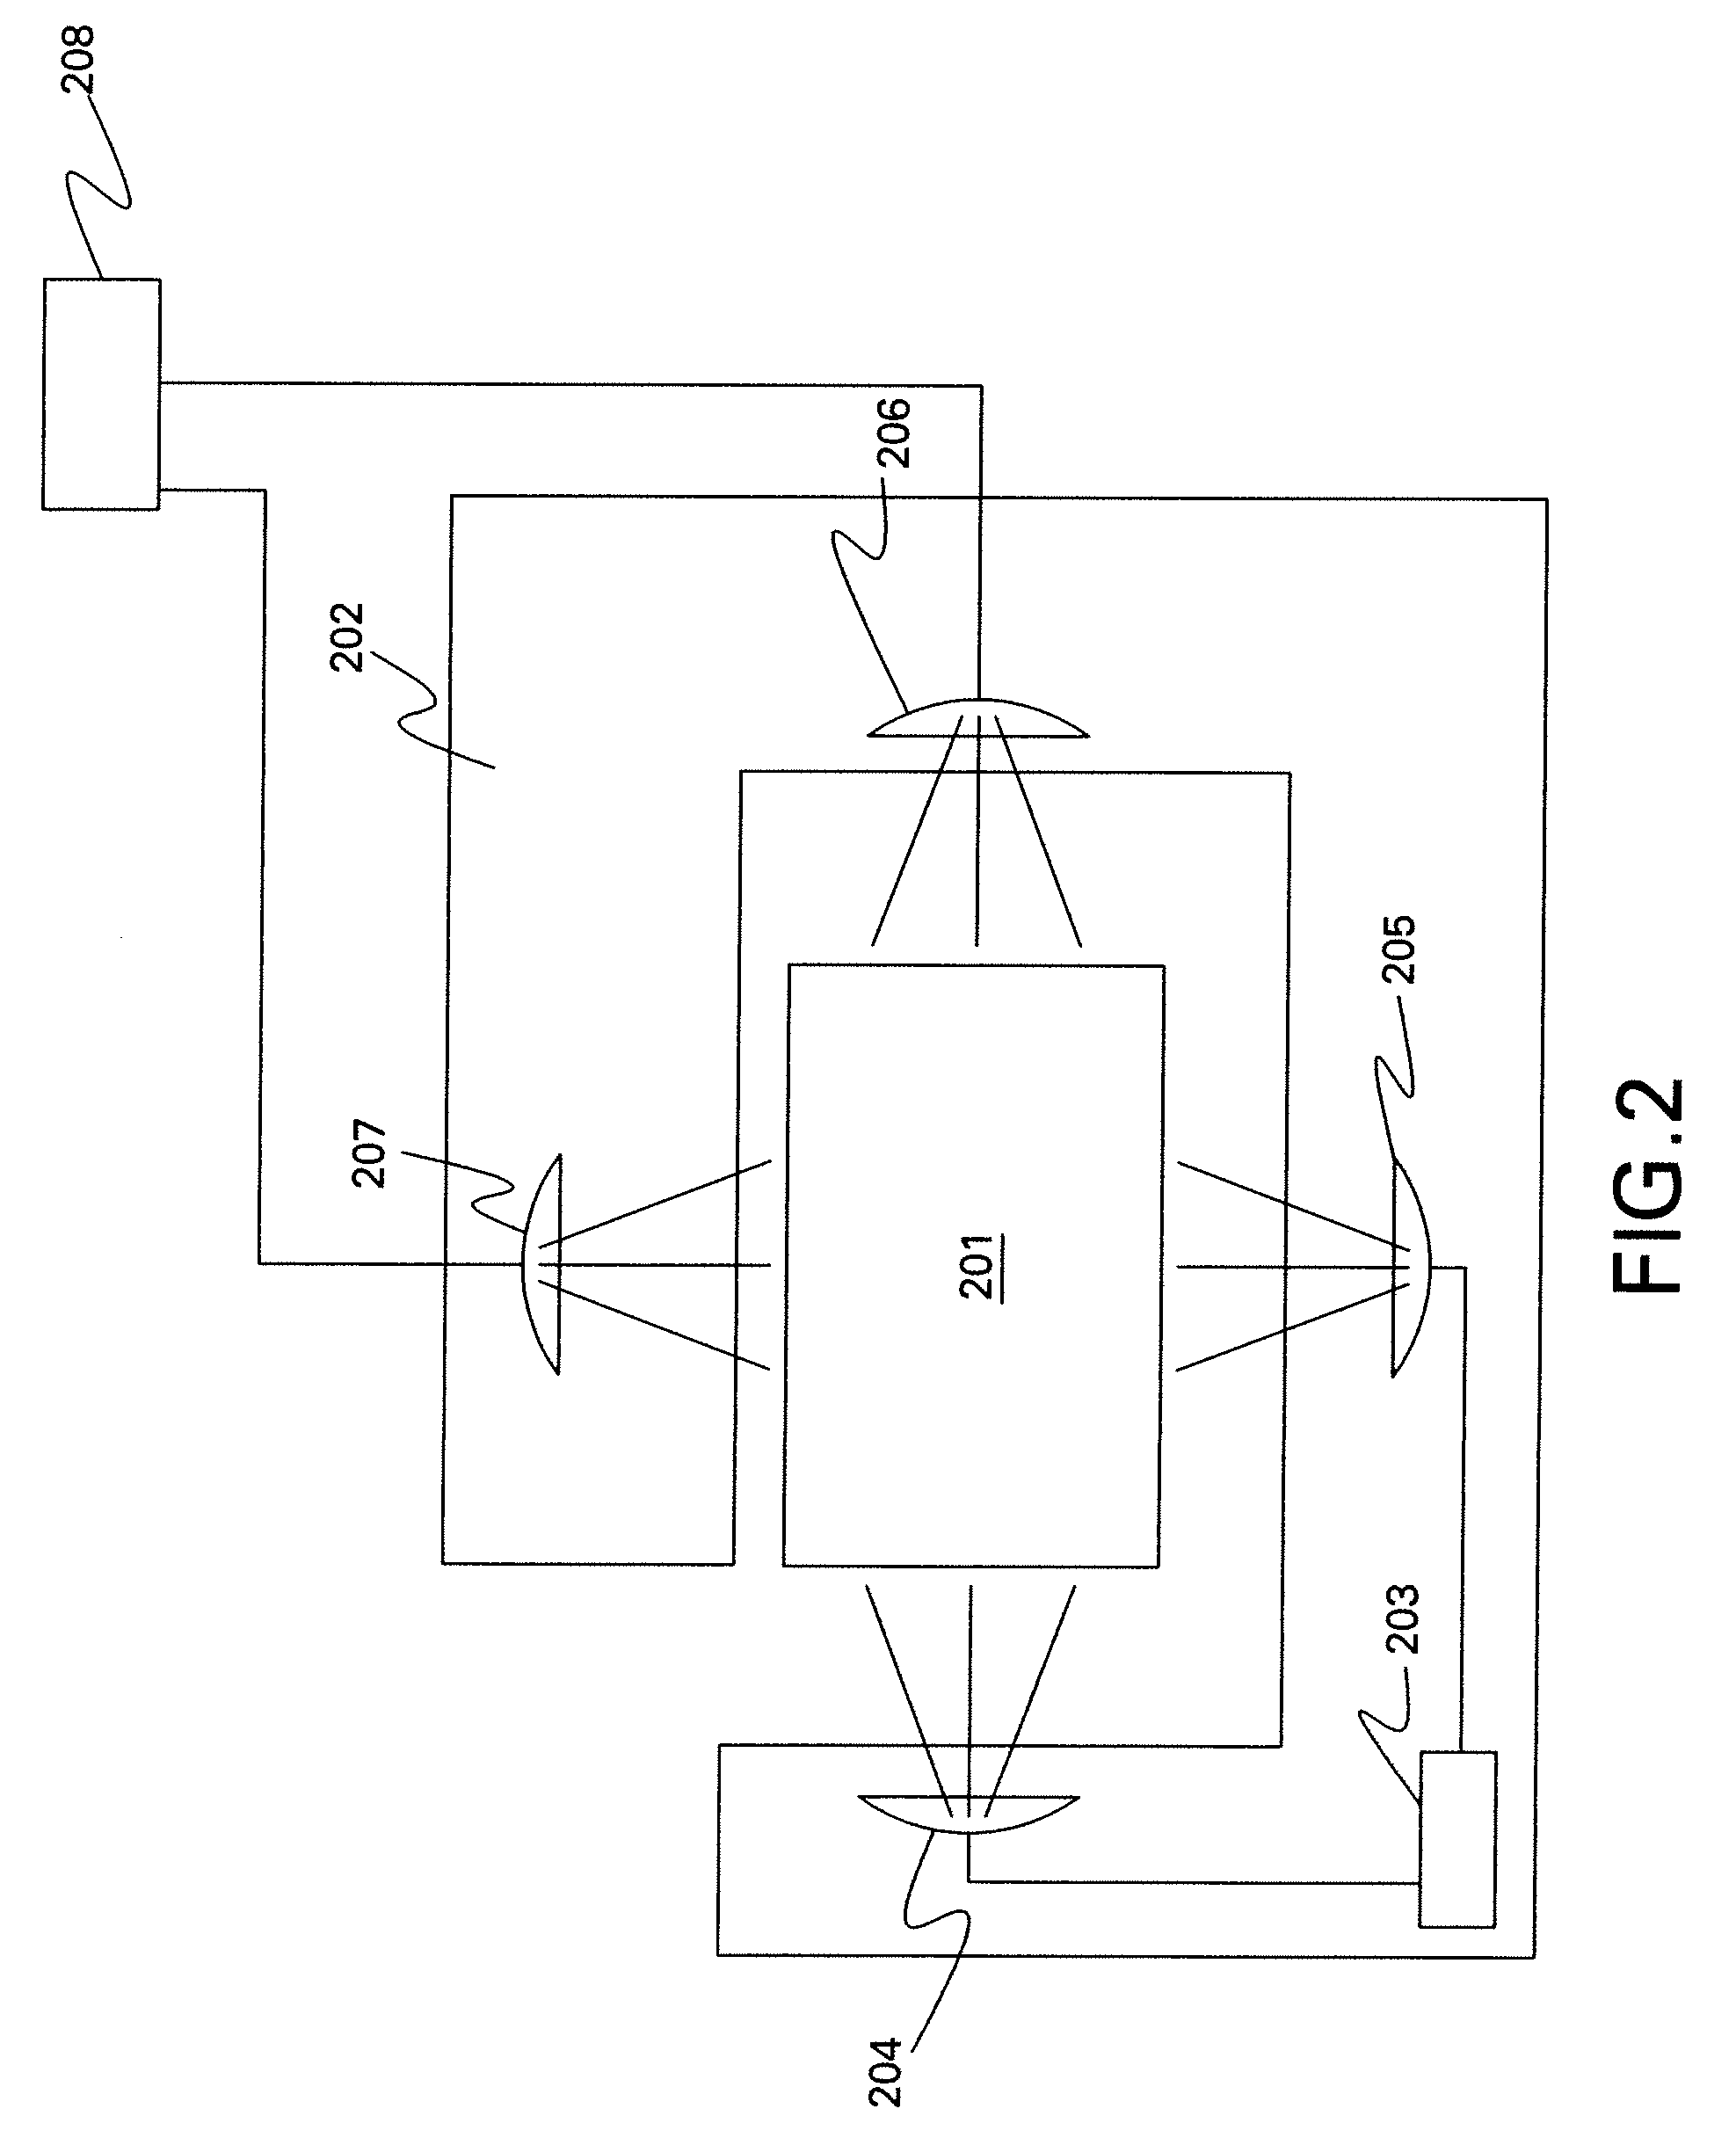 Apparatus and method for fully automated closed system pH measurement